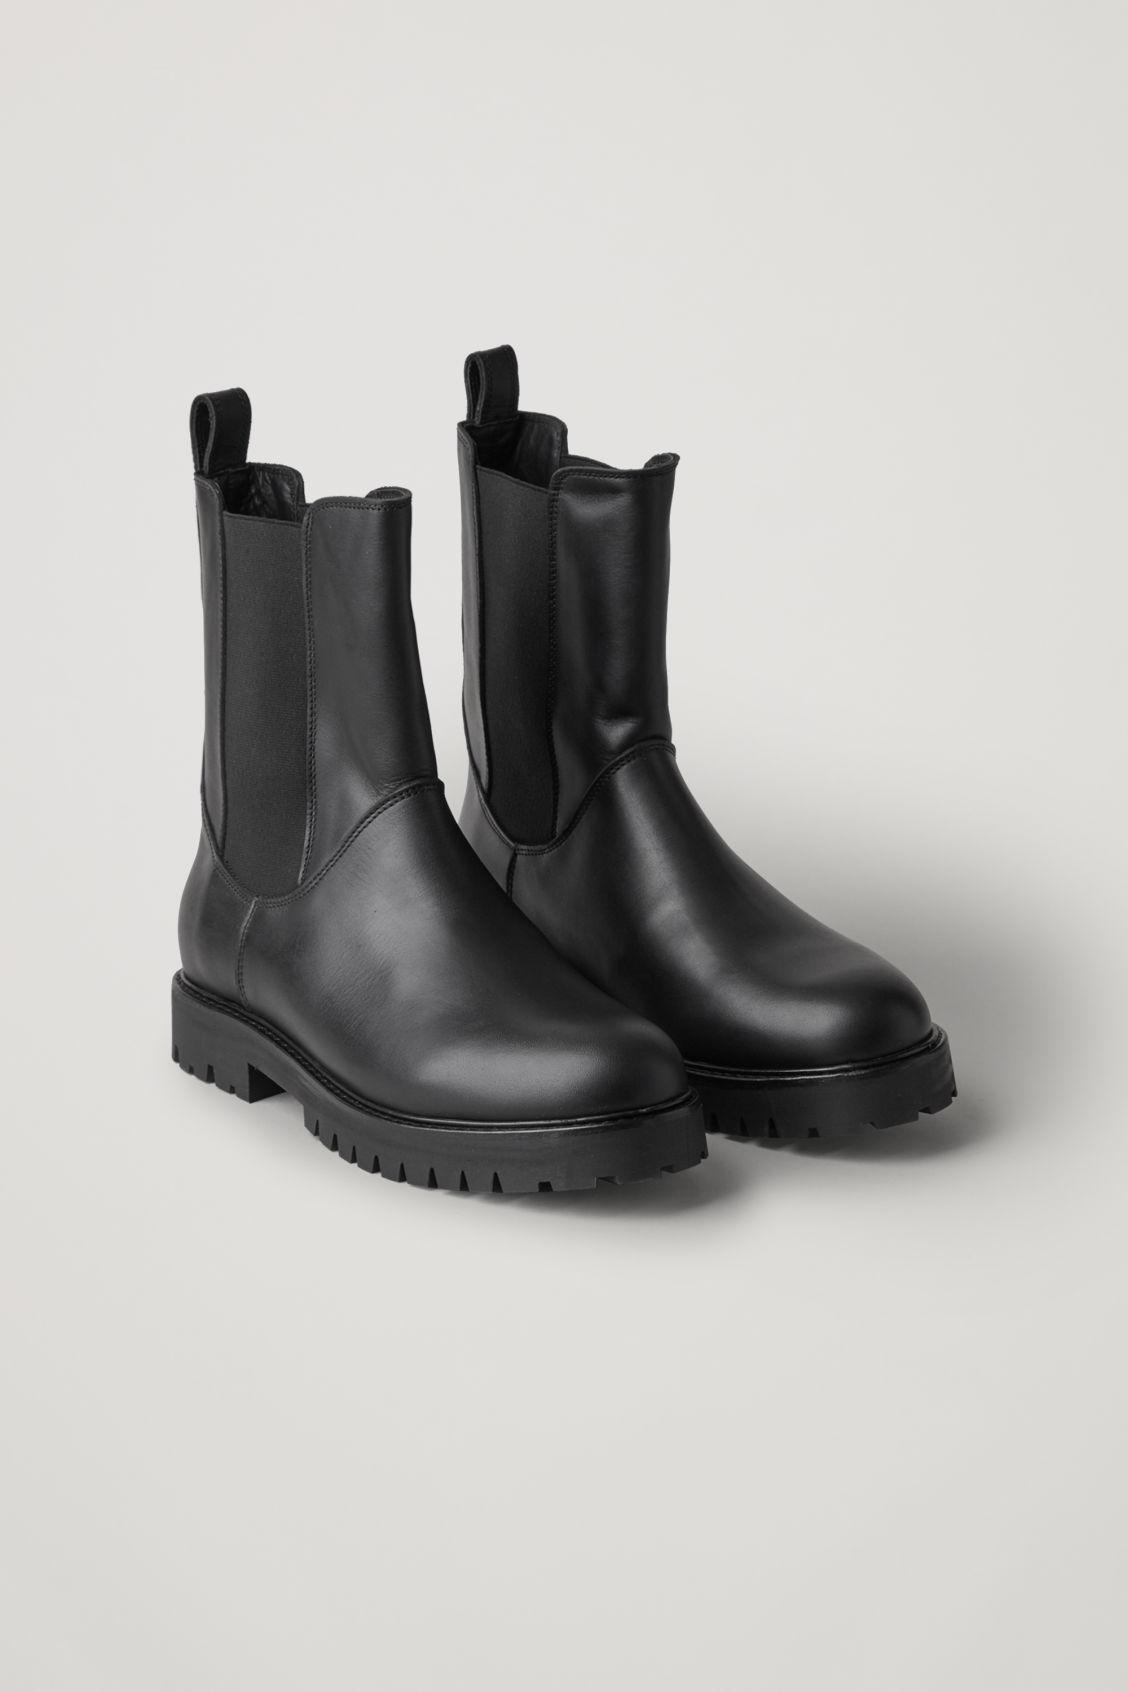 COS High Leather Chelsea Boots in Black - Lyst